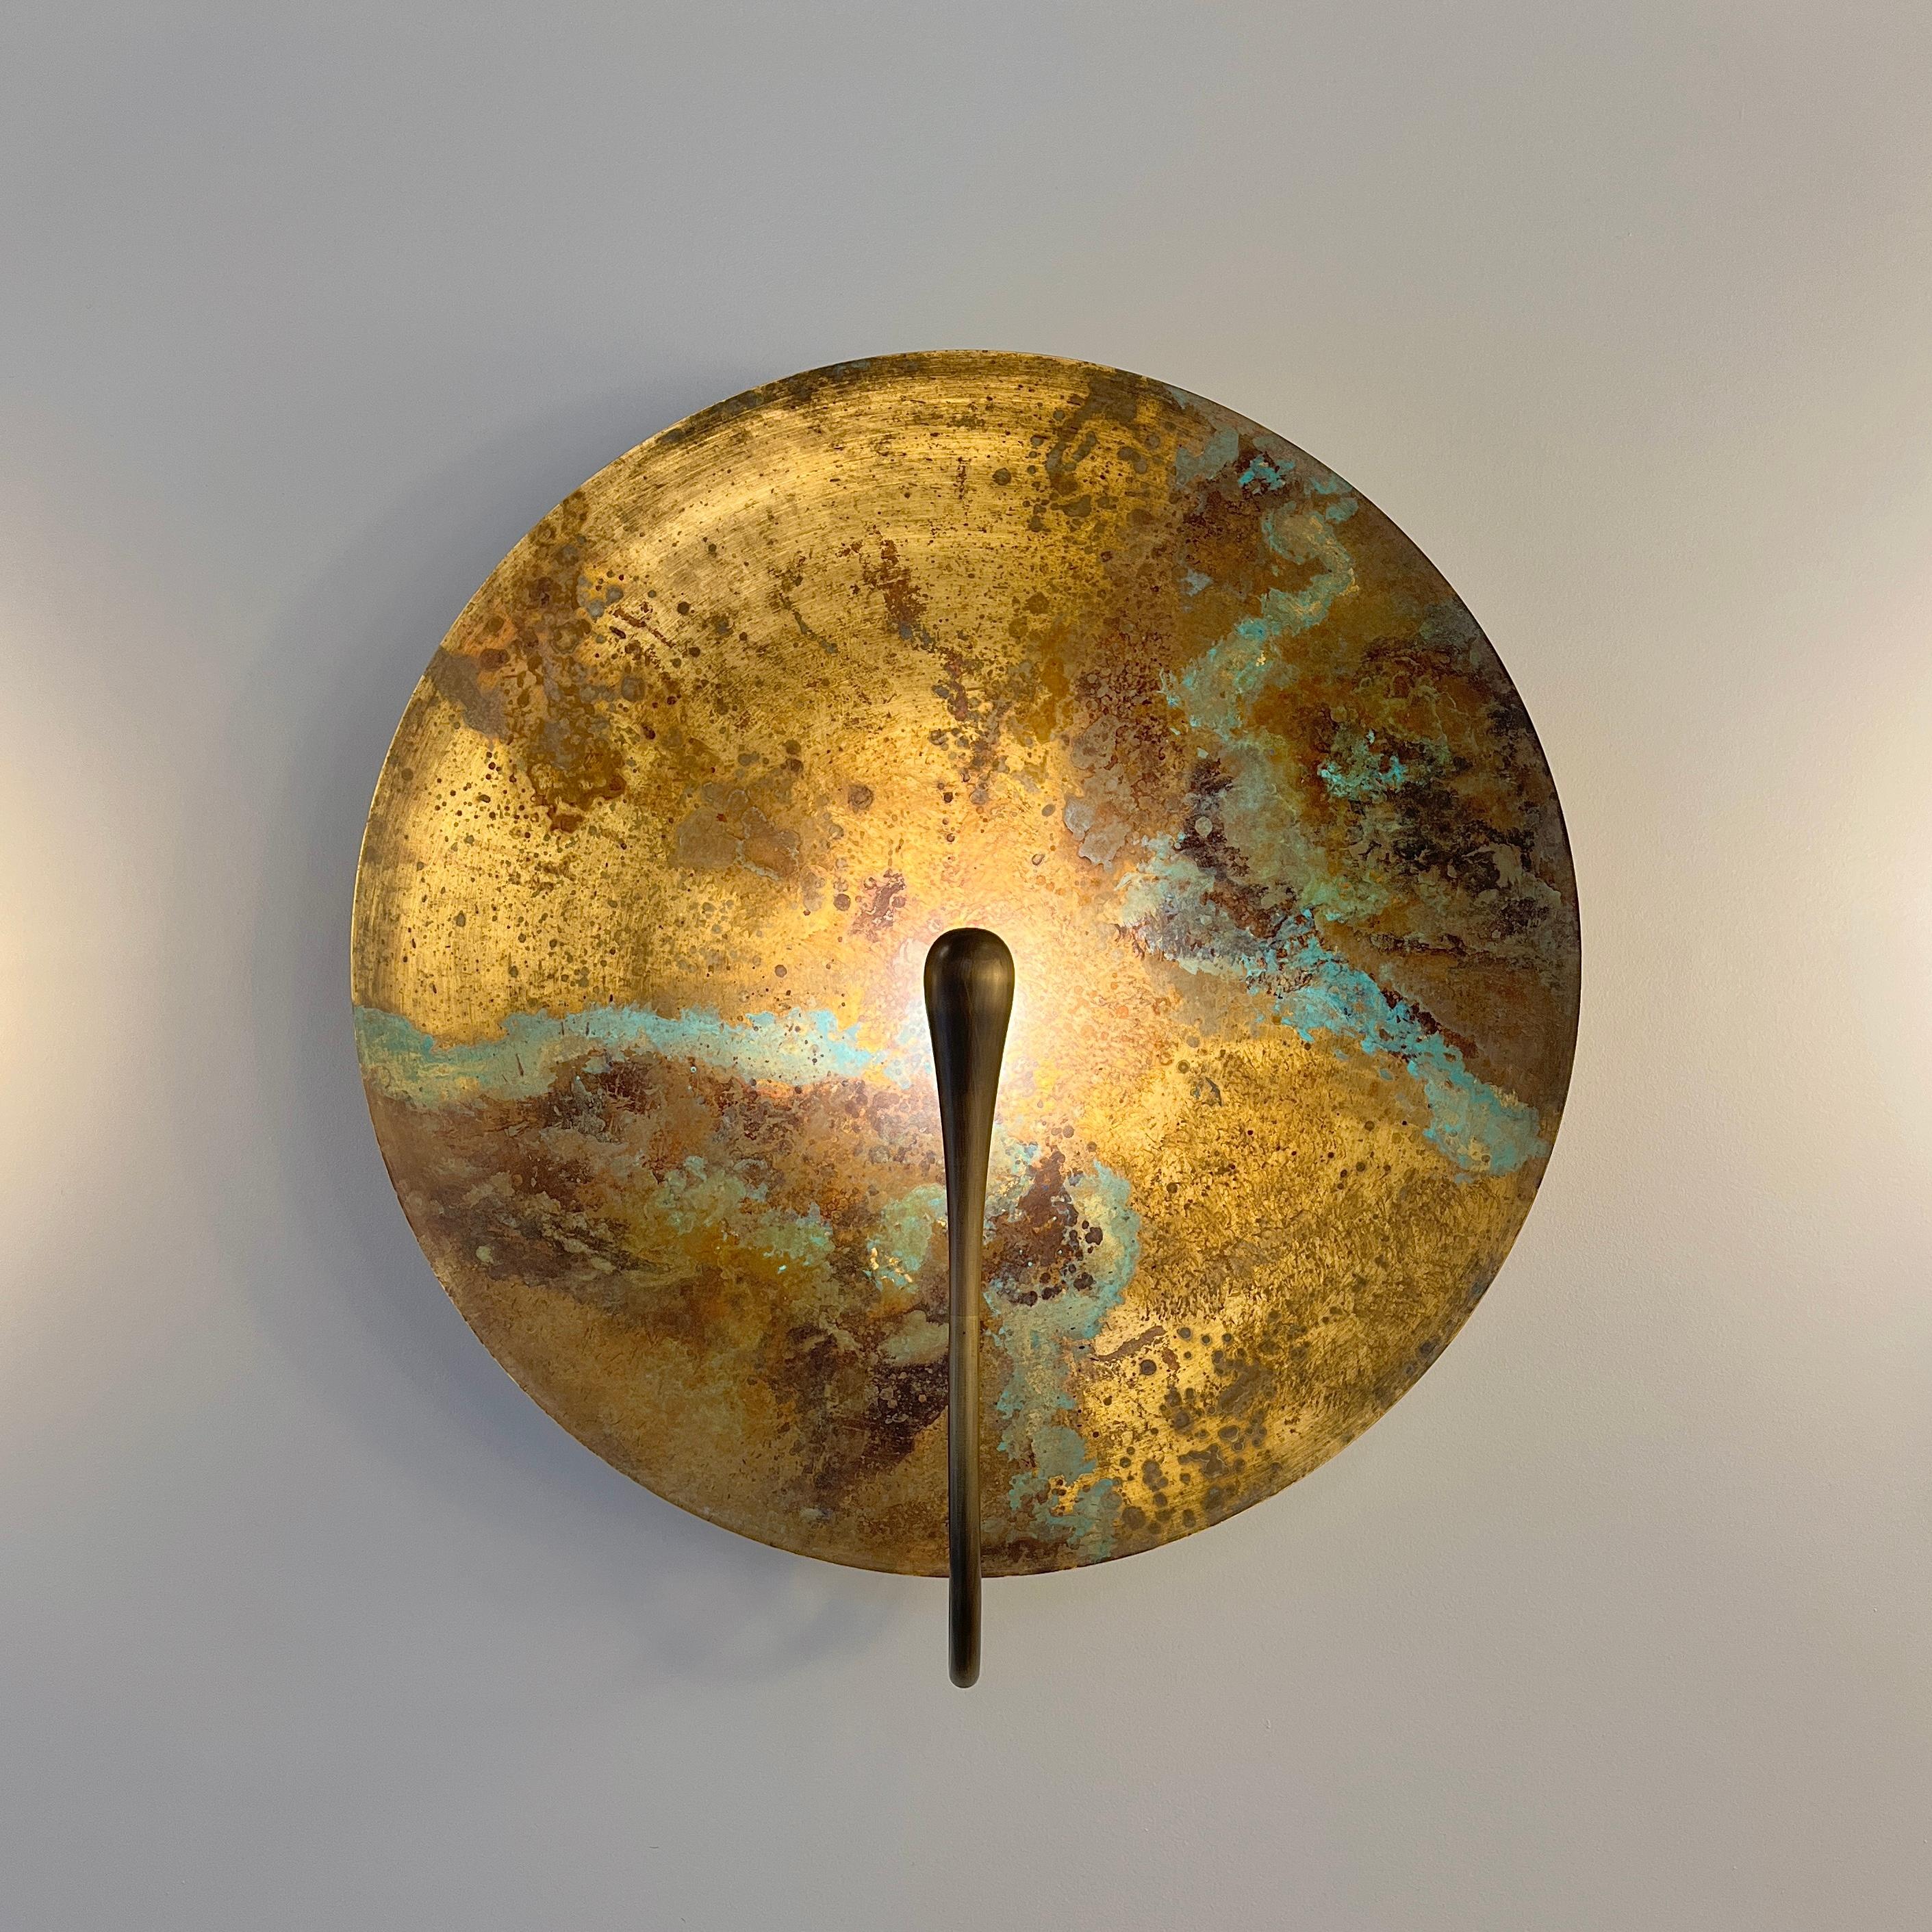 Inspired by the beautiful textures of nature, a mixed patina is applied on a hand-spun brass plate to create this unique finish. Please note each piece is individually handmade, therefore unique in its own way. Softly illuminated with integrated LED